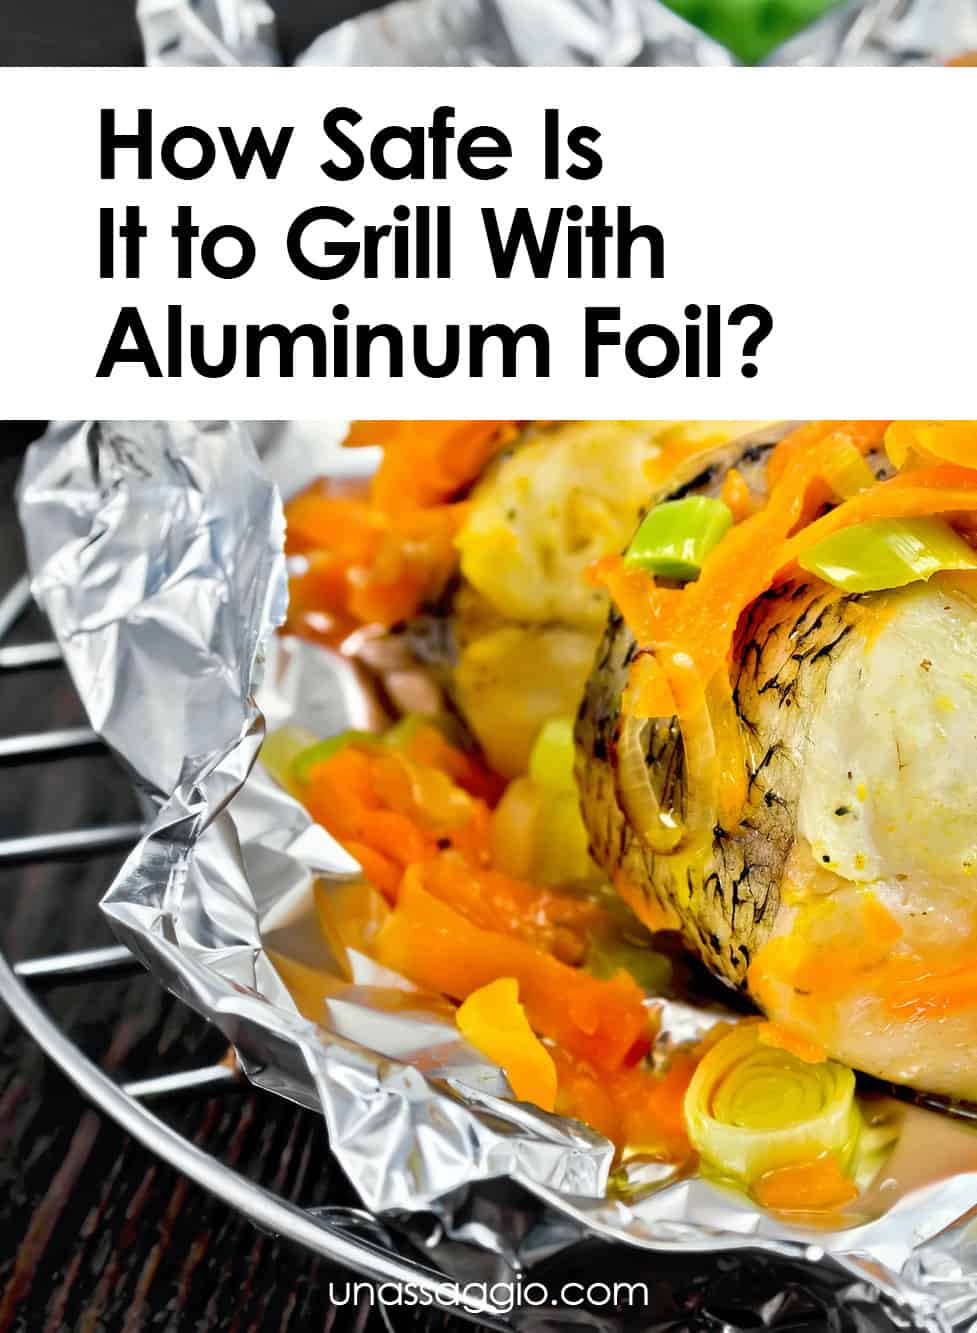 How Safe Is It to Grill With Aluminum Foil